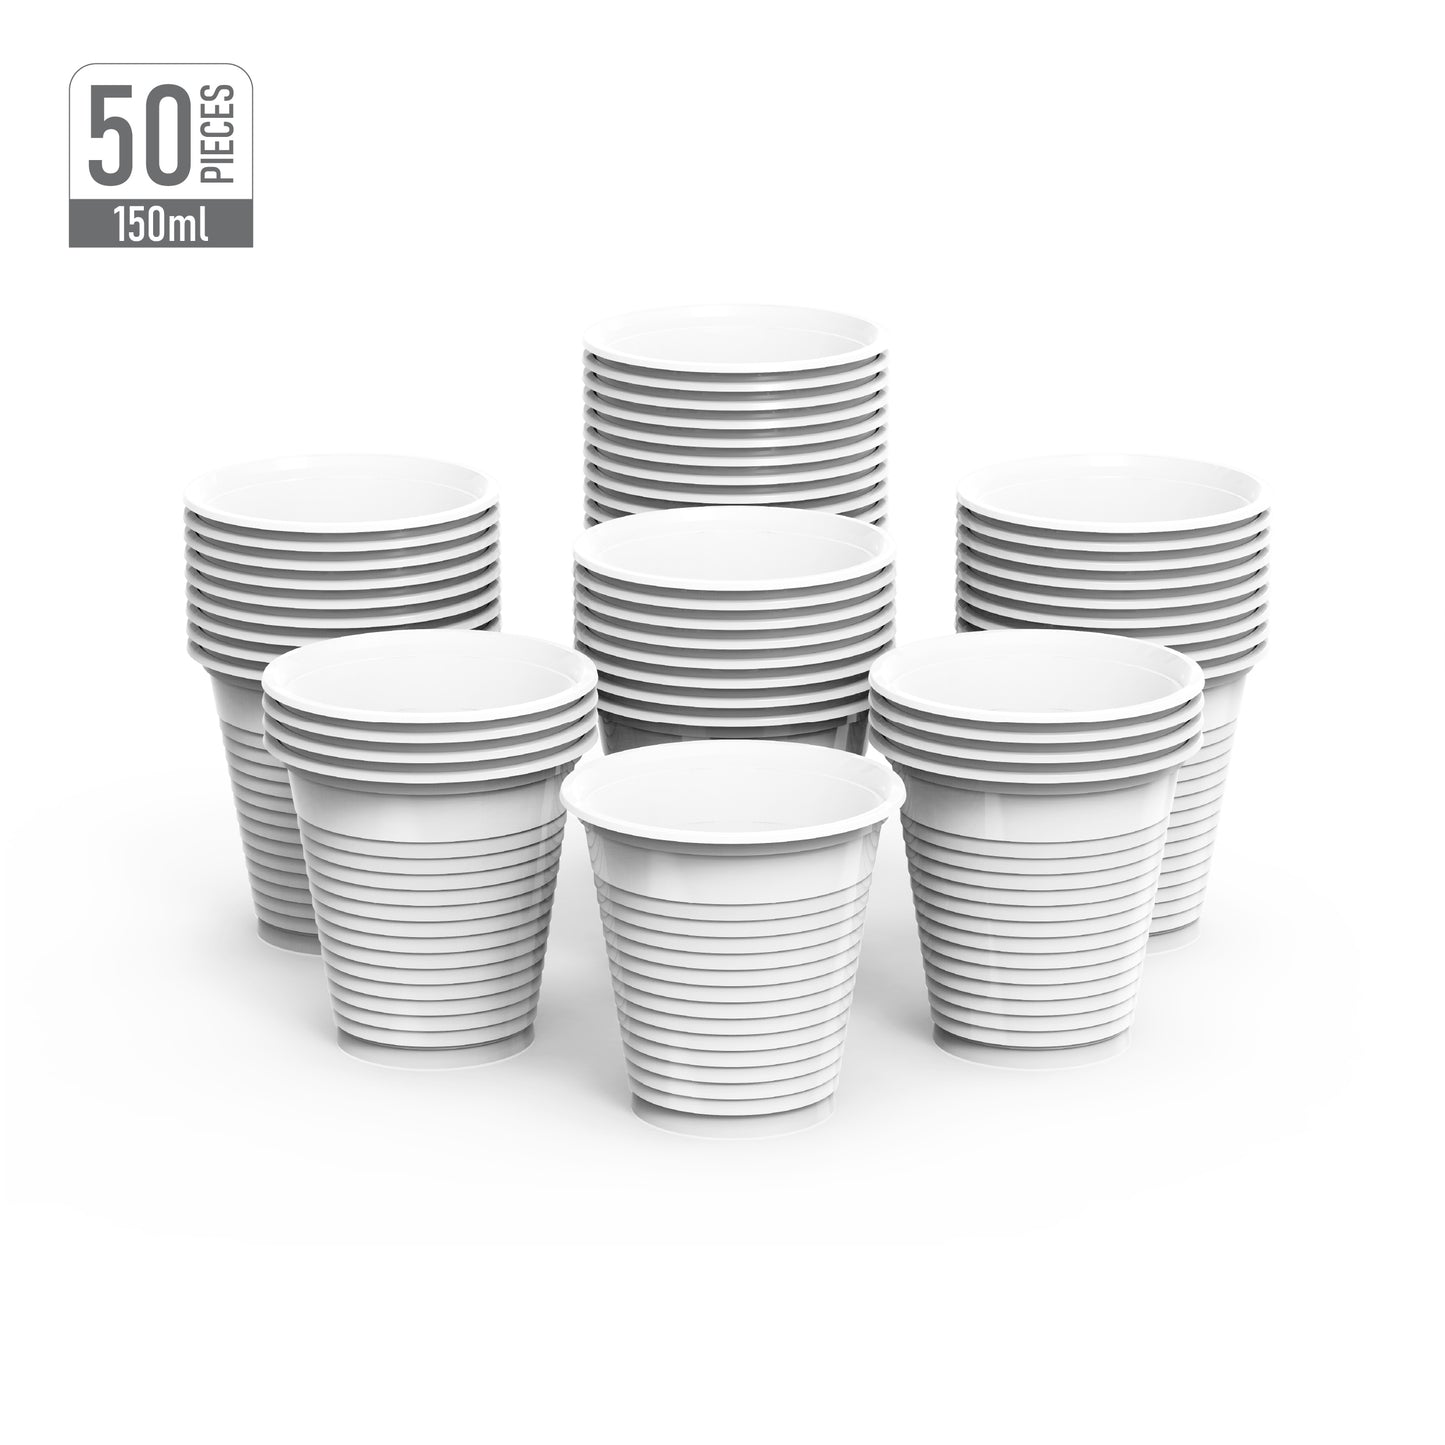 150 ml White Plastic Cups Pack of 50